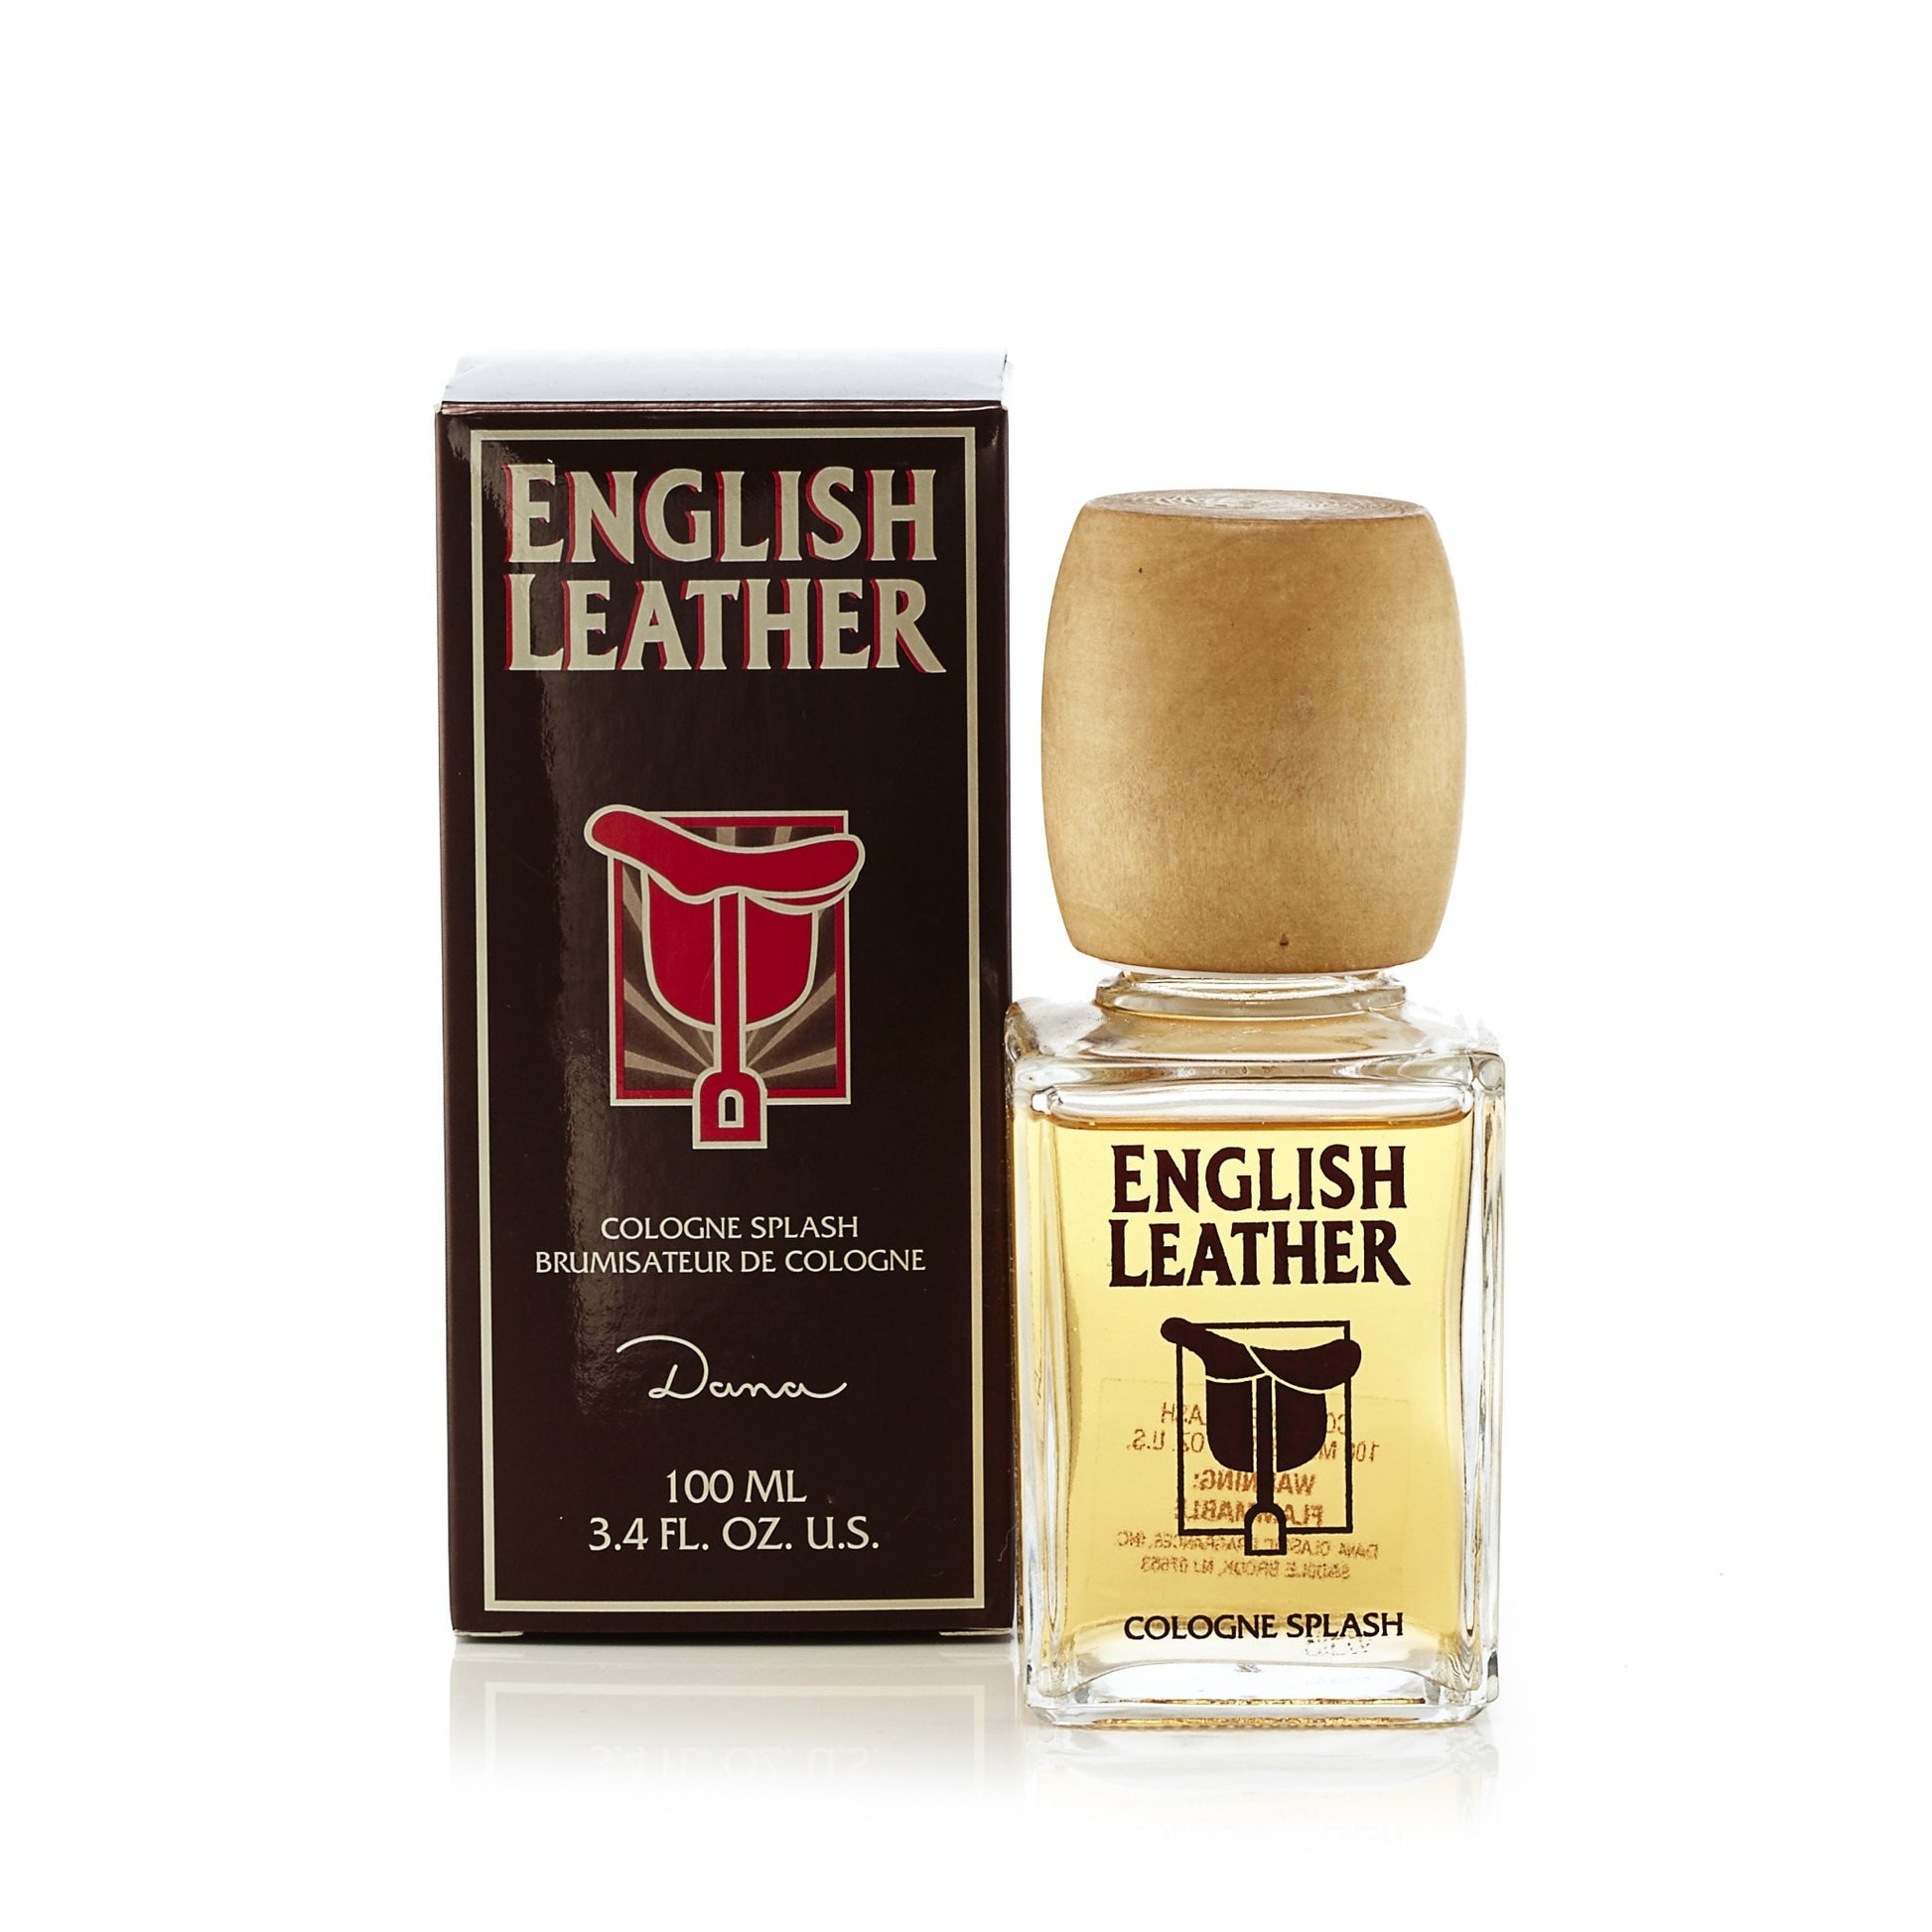 English Leather Cologne for Men by Dana 3.4 oz. Click to open in modal